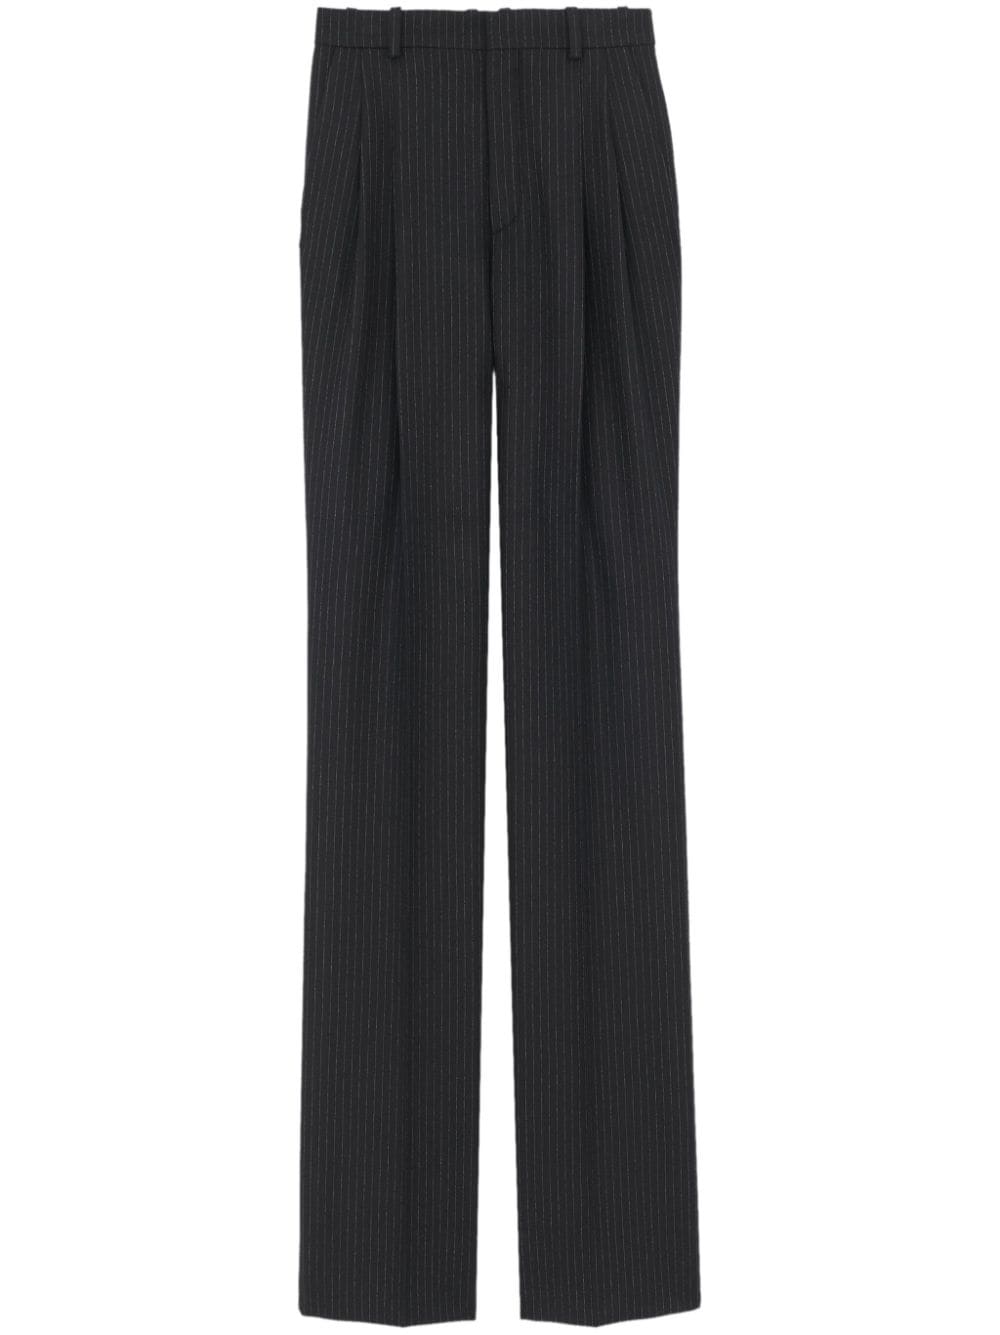 Saint Laurent Striped Flared Trousers In Black